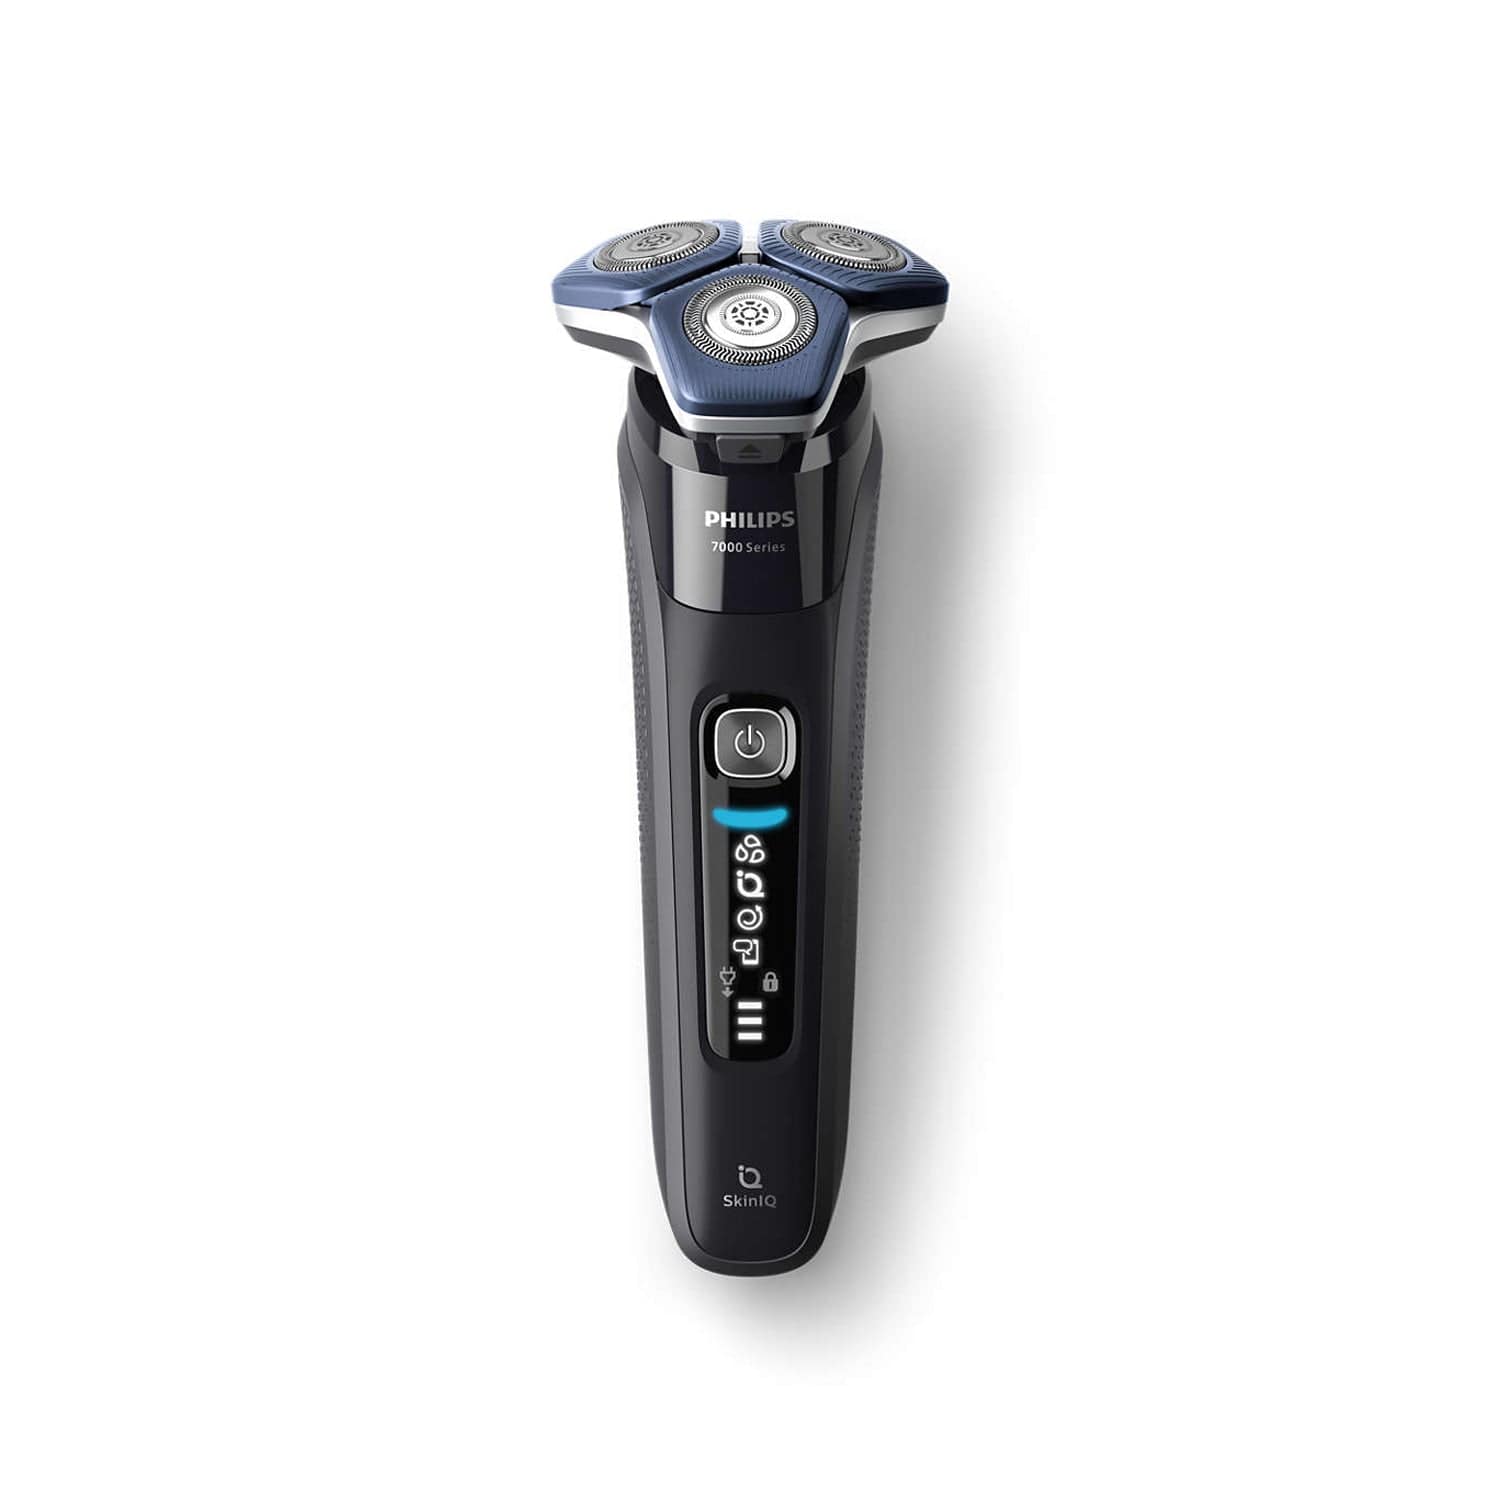 Philips S7886/50 Shaver Series 7000 Wet u0026 Dry Electric Shaver with Ski